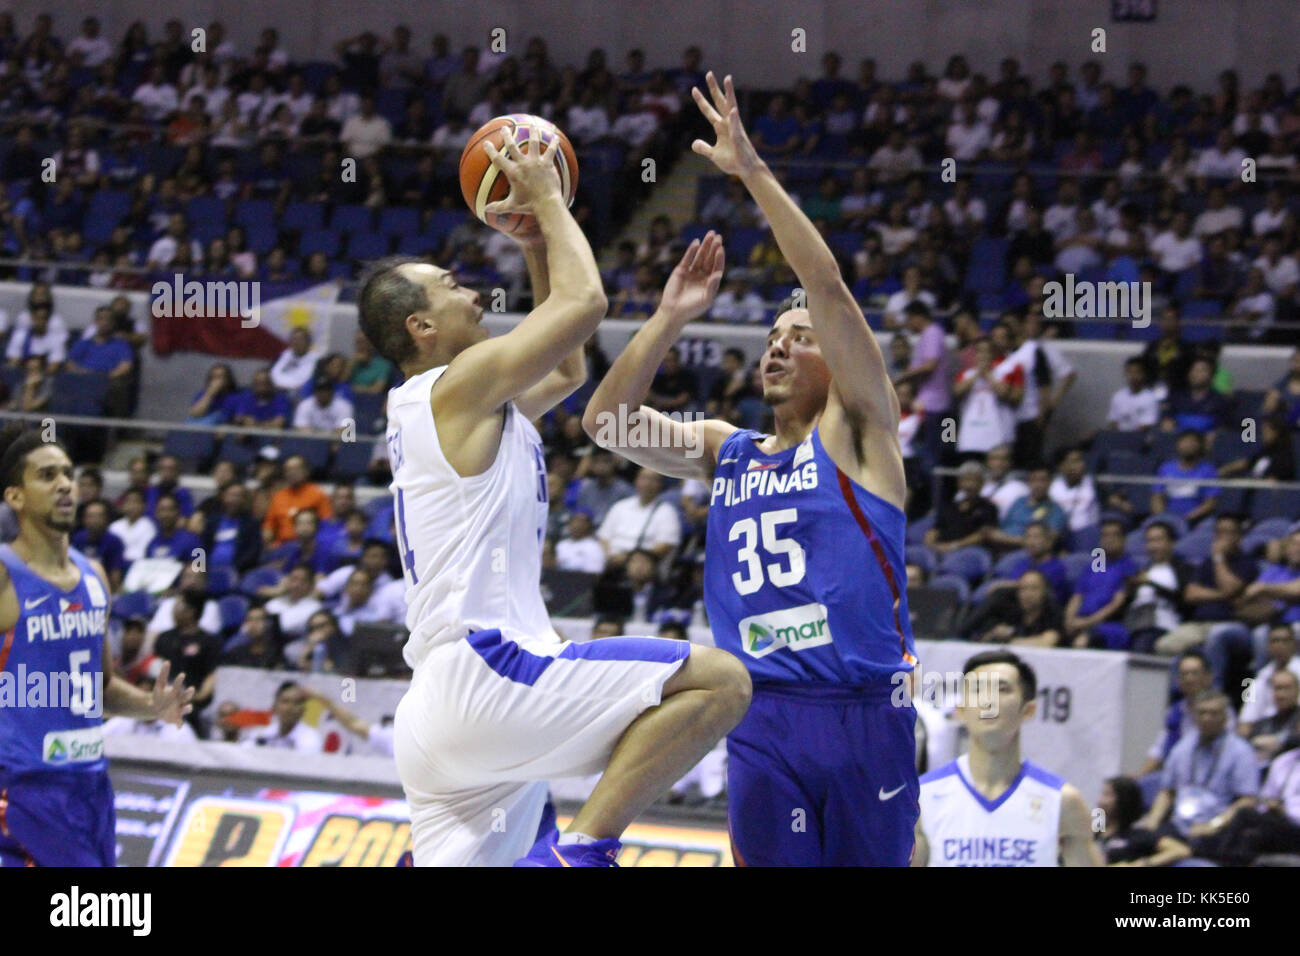 Quezon City, Philippines. 27th Nov, 2017. Wen-Chen Tsai (14) of Chinese Taipei tries to shoot the ball over Matthew Wright (35) of the Philippines during their FIBA World Cup Qualifying Game. Gilas Pilipinas defeated the visiting Chinese Taipei team 90-83 to complete a sweep of their first two assignments in the FIBA 2019 World Cup qualifiers. Credit: Dennis Jerome Acosta/ Pacific Press/Alamy Live News Stock Photo